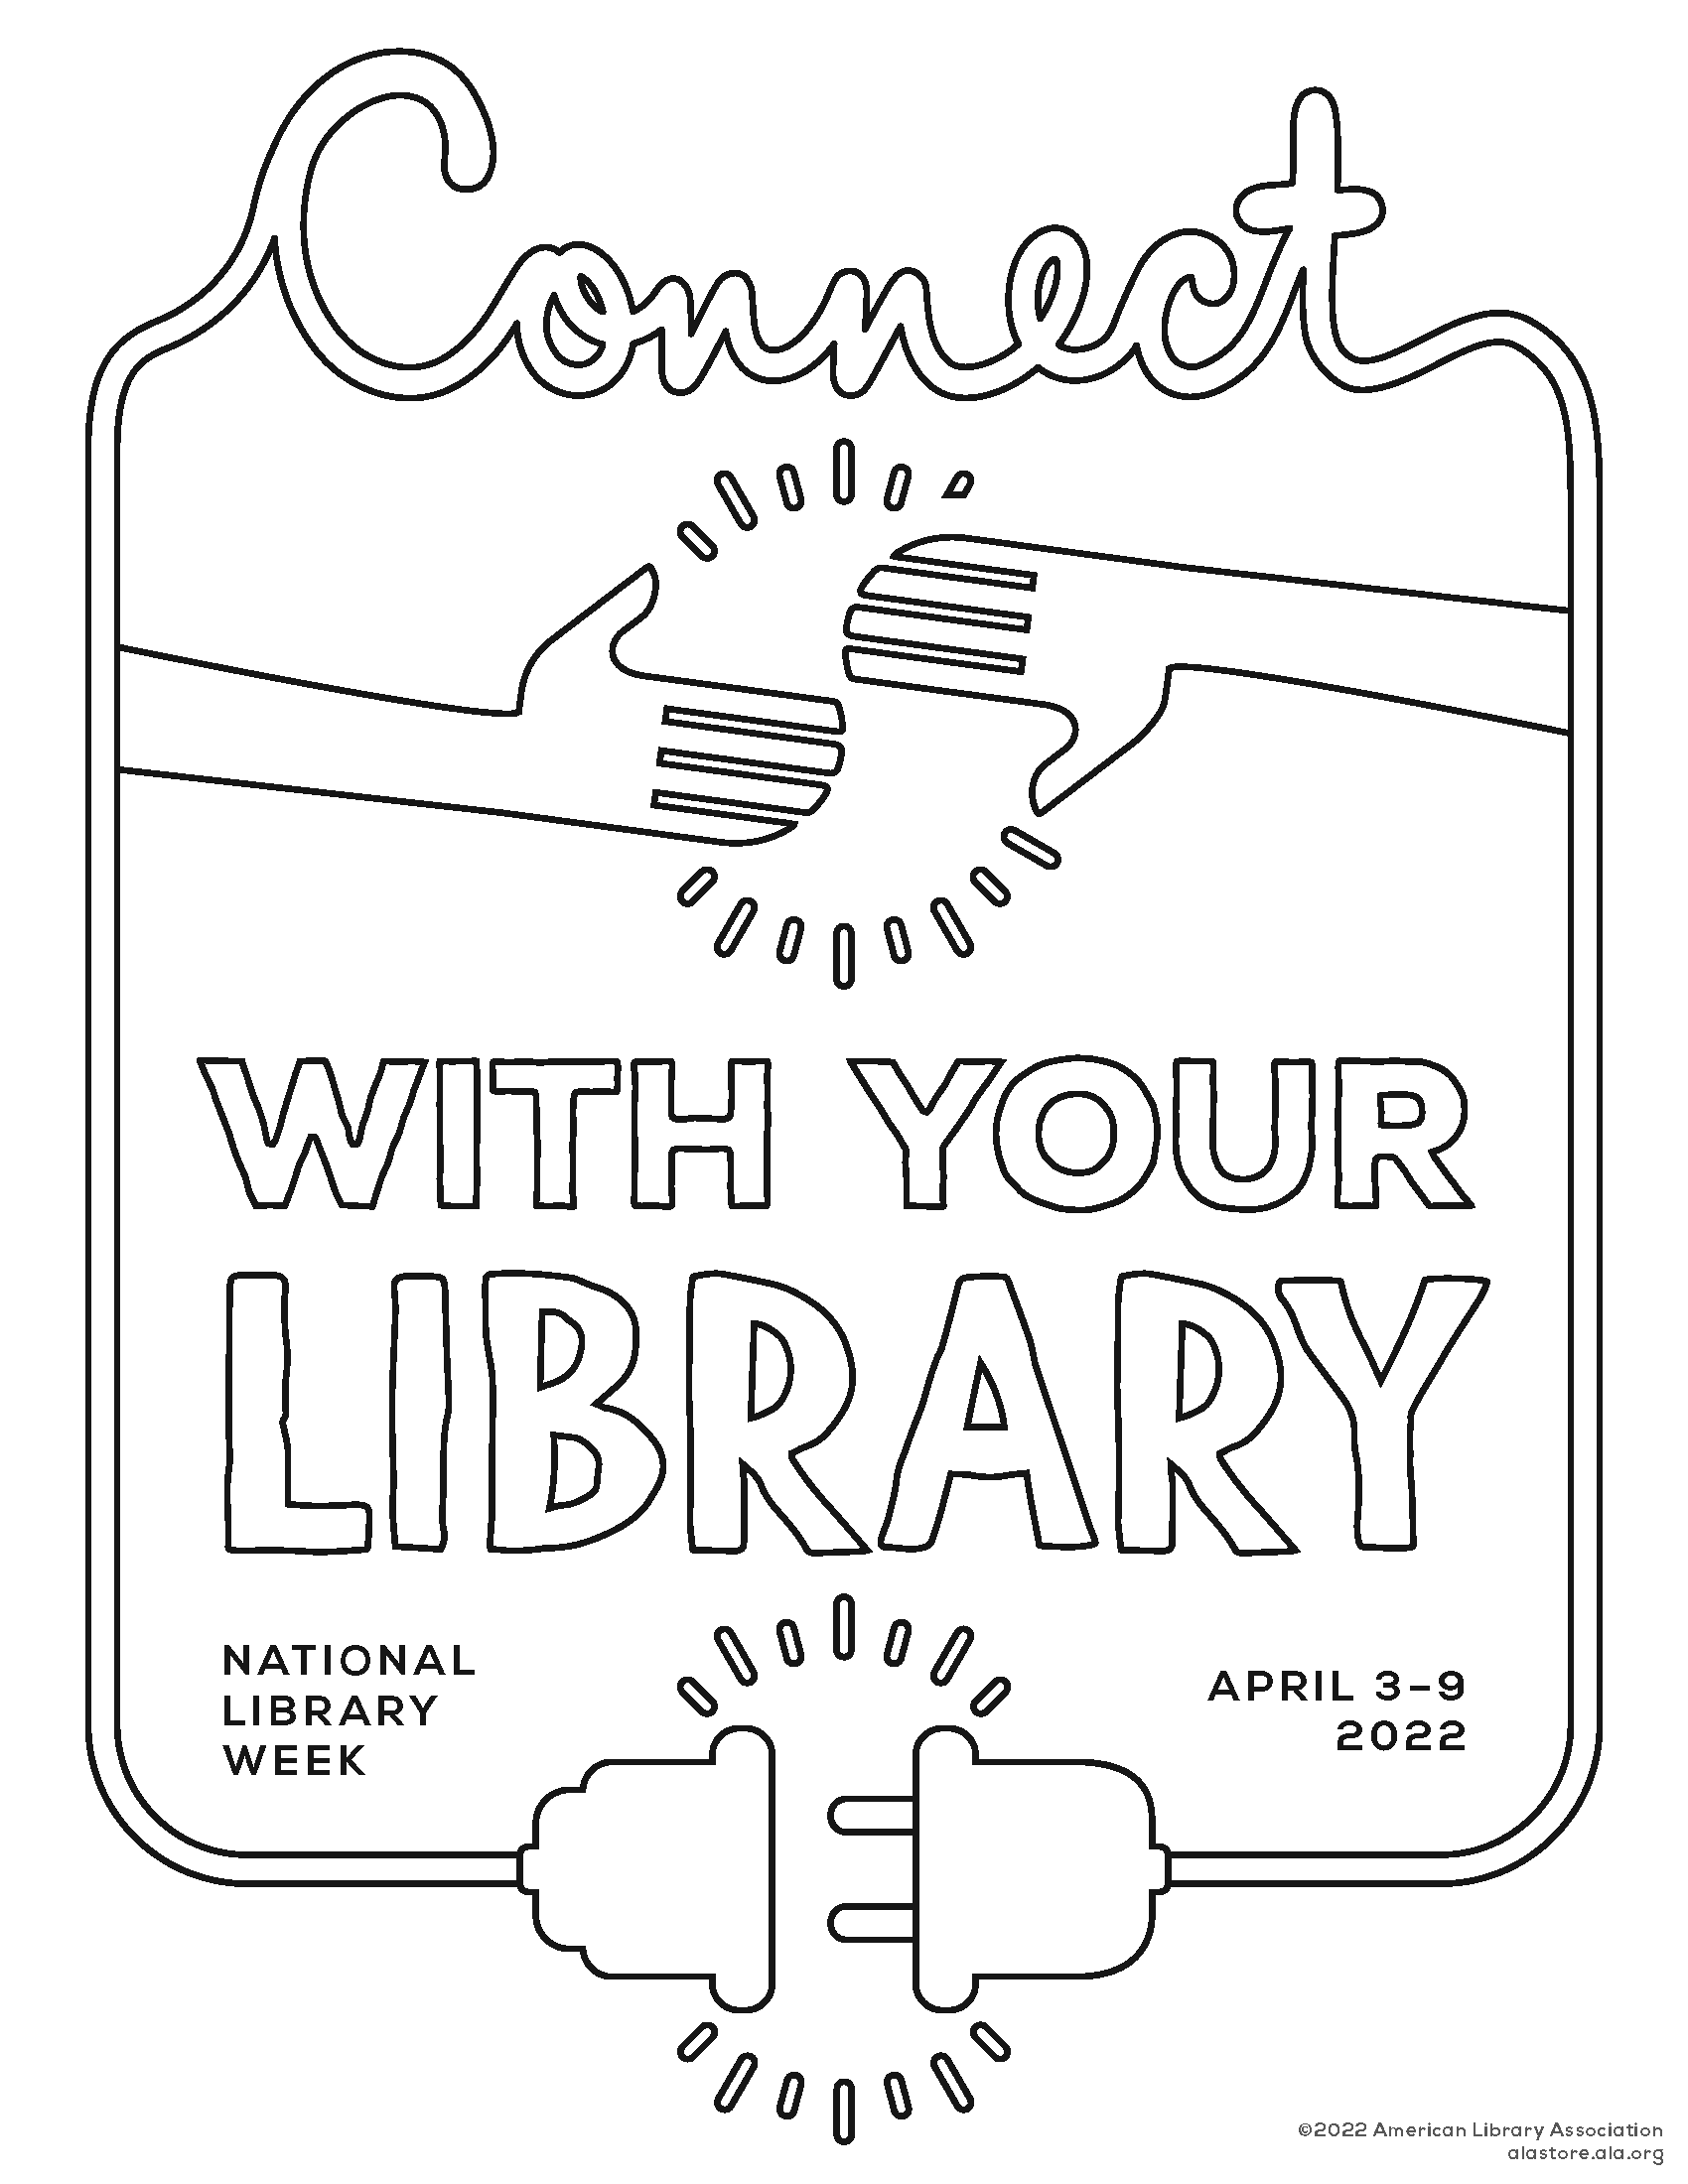 Download a national library week coloring packet fulton county library system